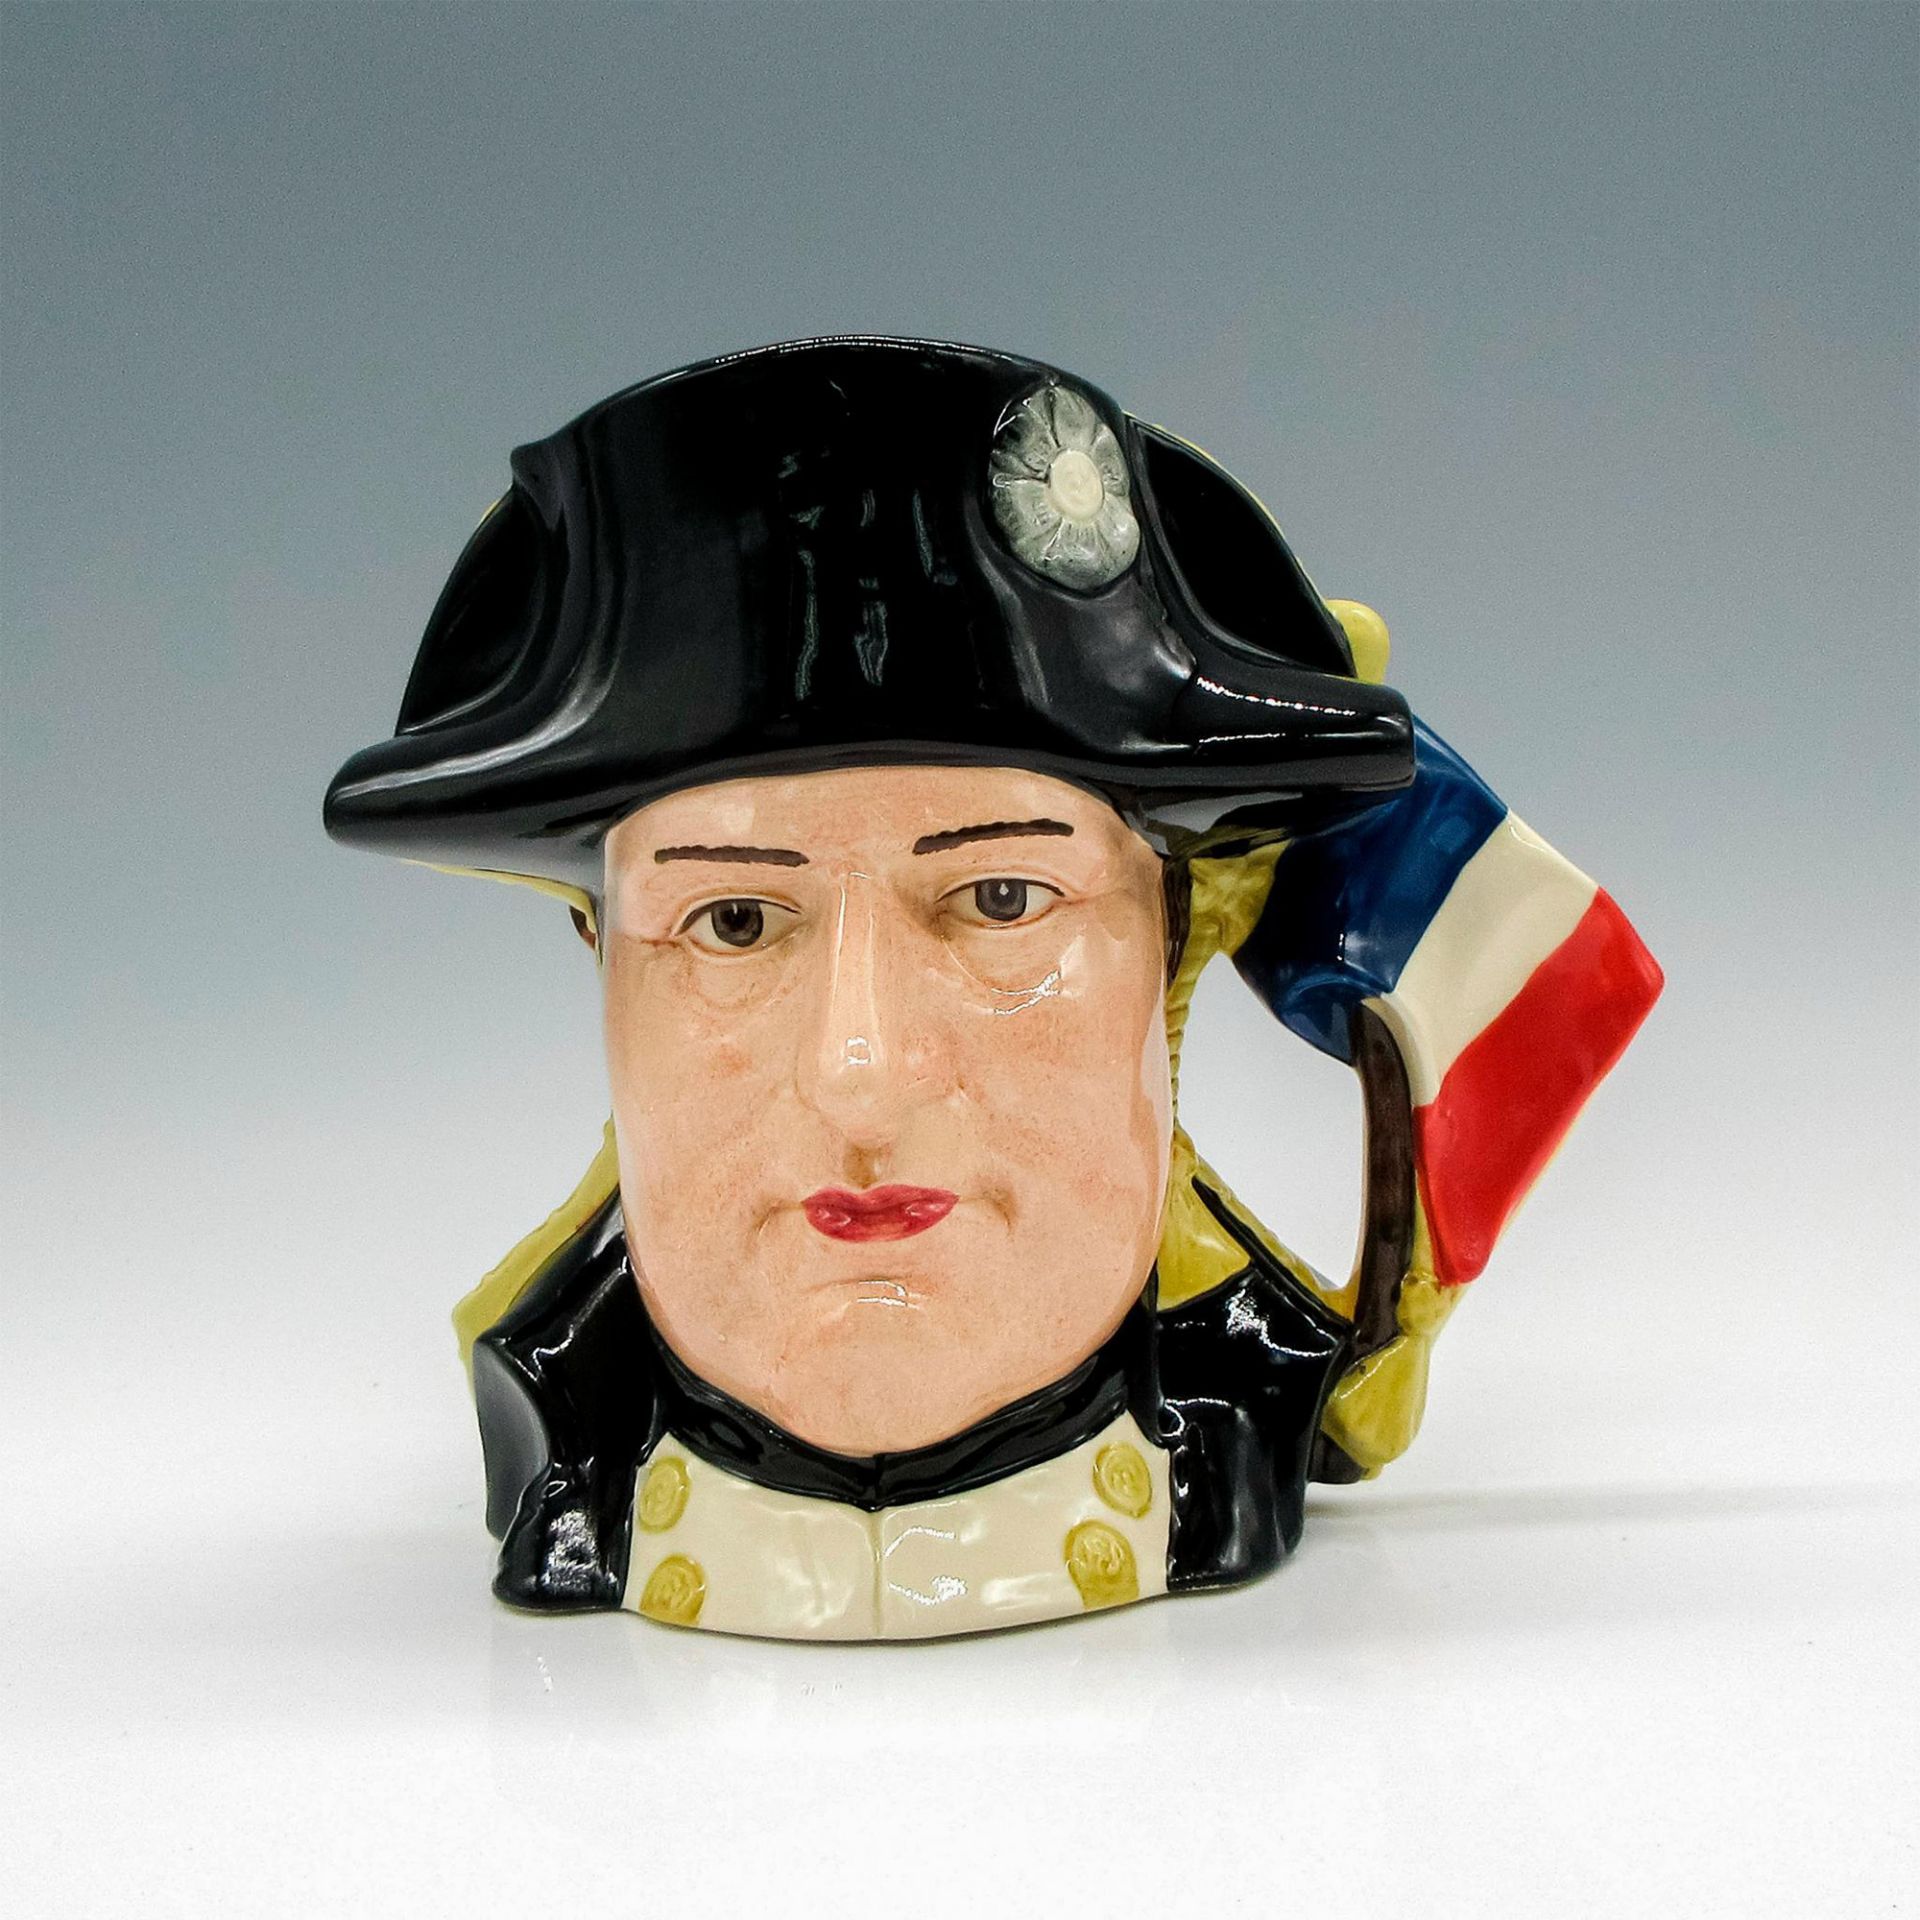 Napoleon and Josephine D6750 (Doublefaced) - Large - Royal Doulton Character Jug - Image 3 of 5